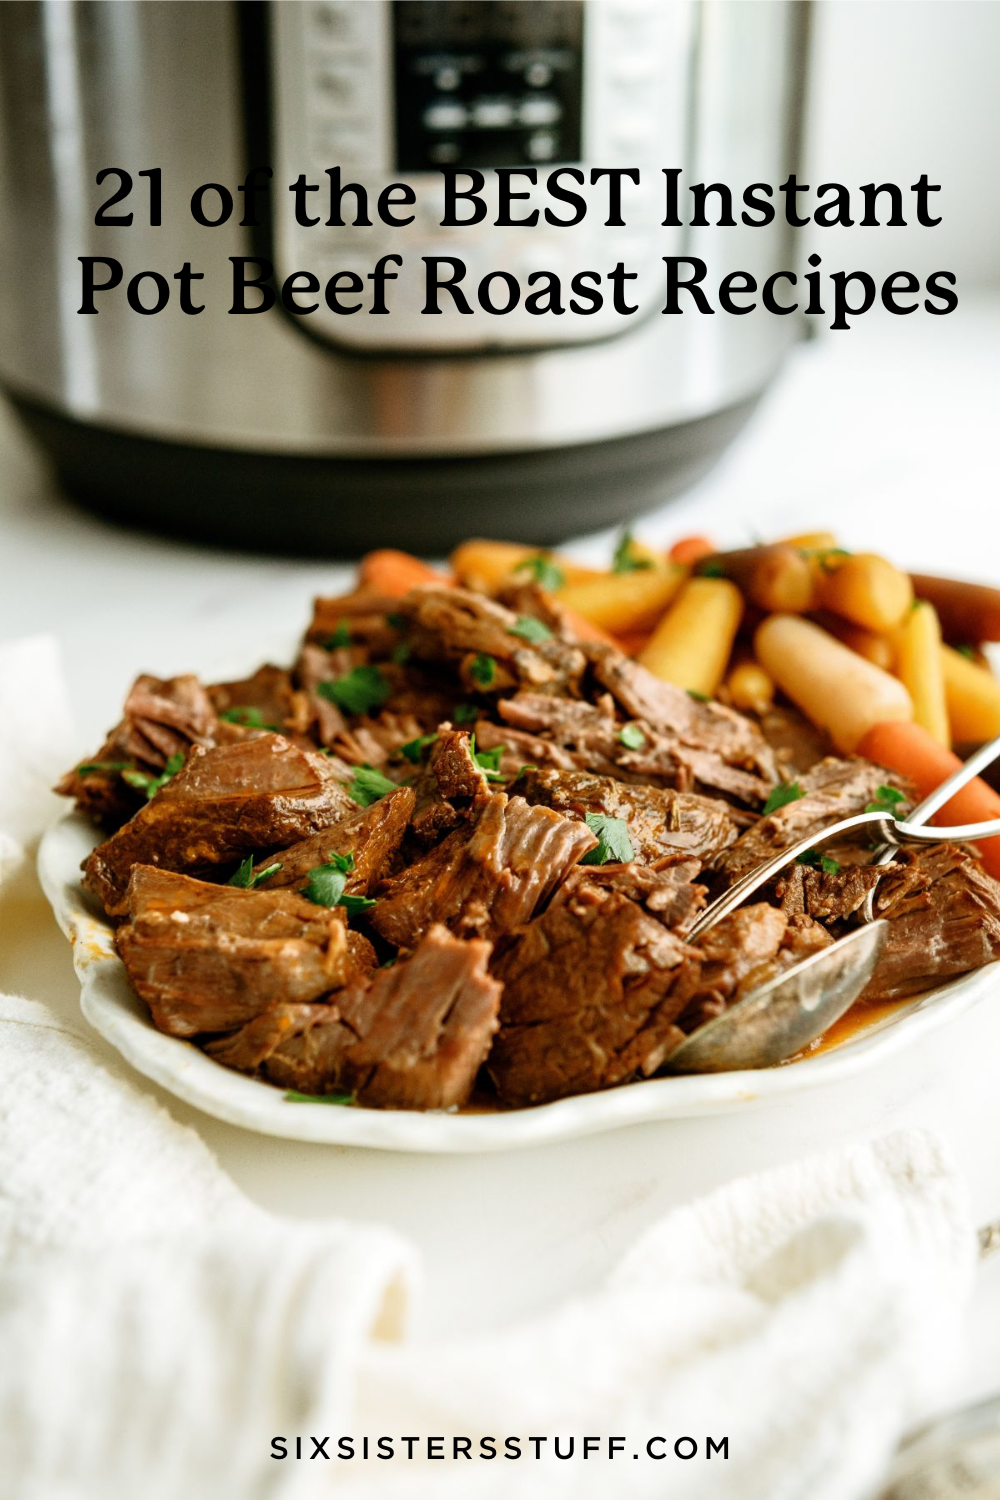 21 of the BEST Instant Pot Beef Roast Recipes